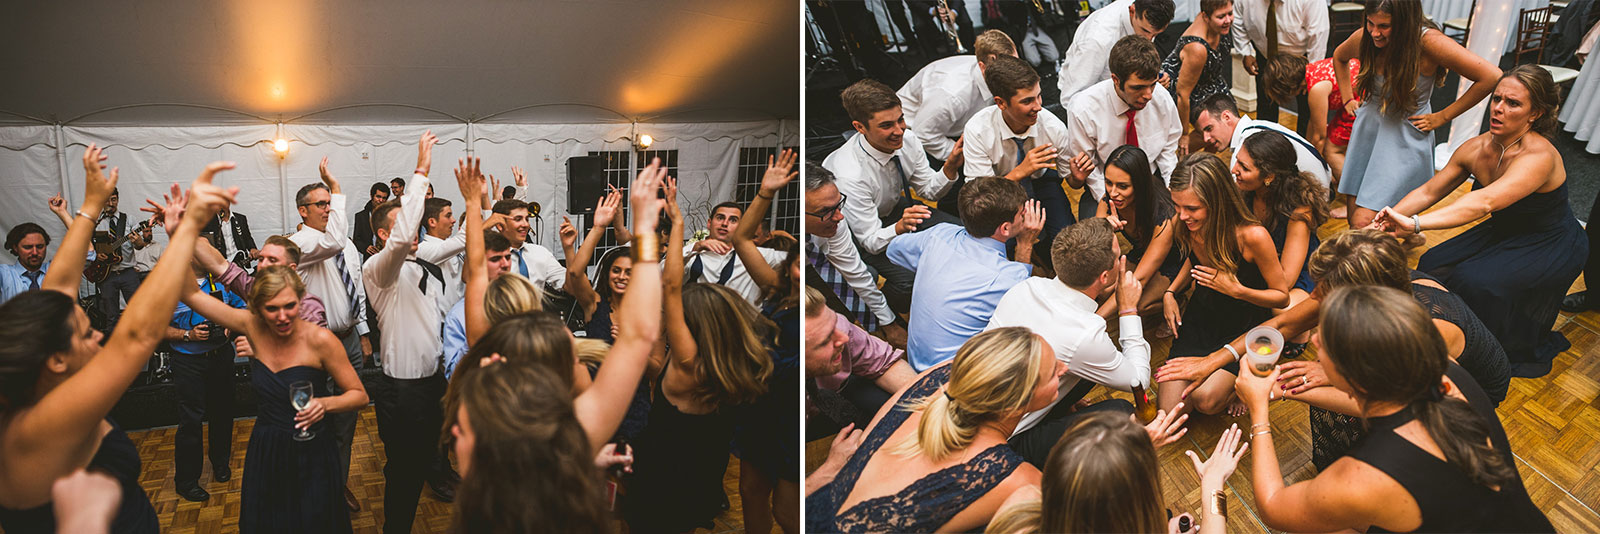 100 best photogrpahy of receptions in chicago - Stephanie + Zack // Conway Farms Chicago Wedding Photographers